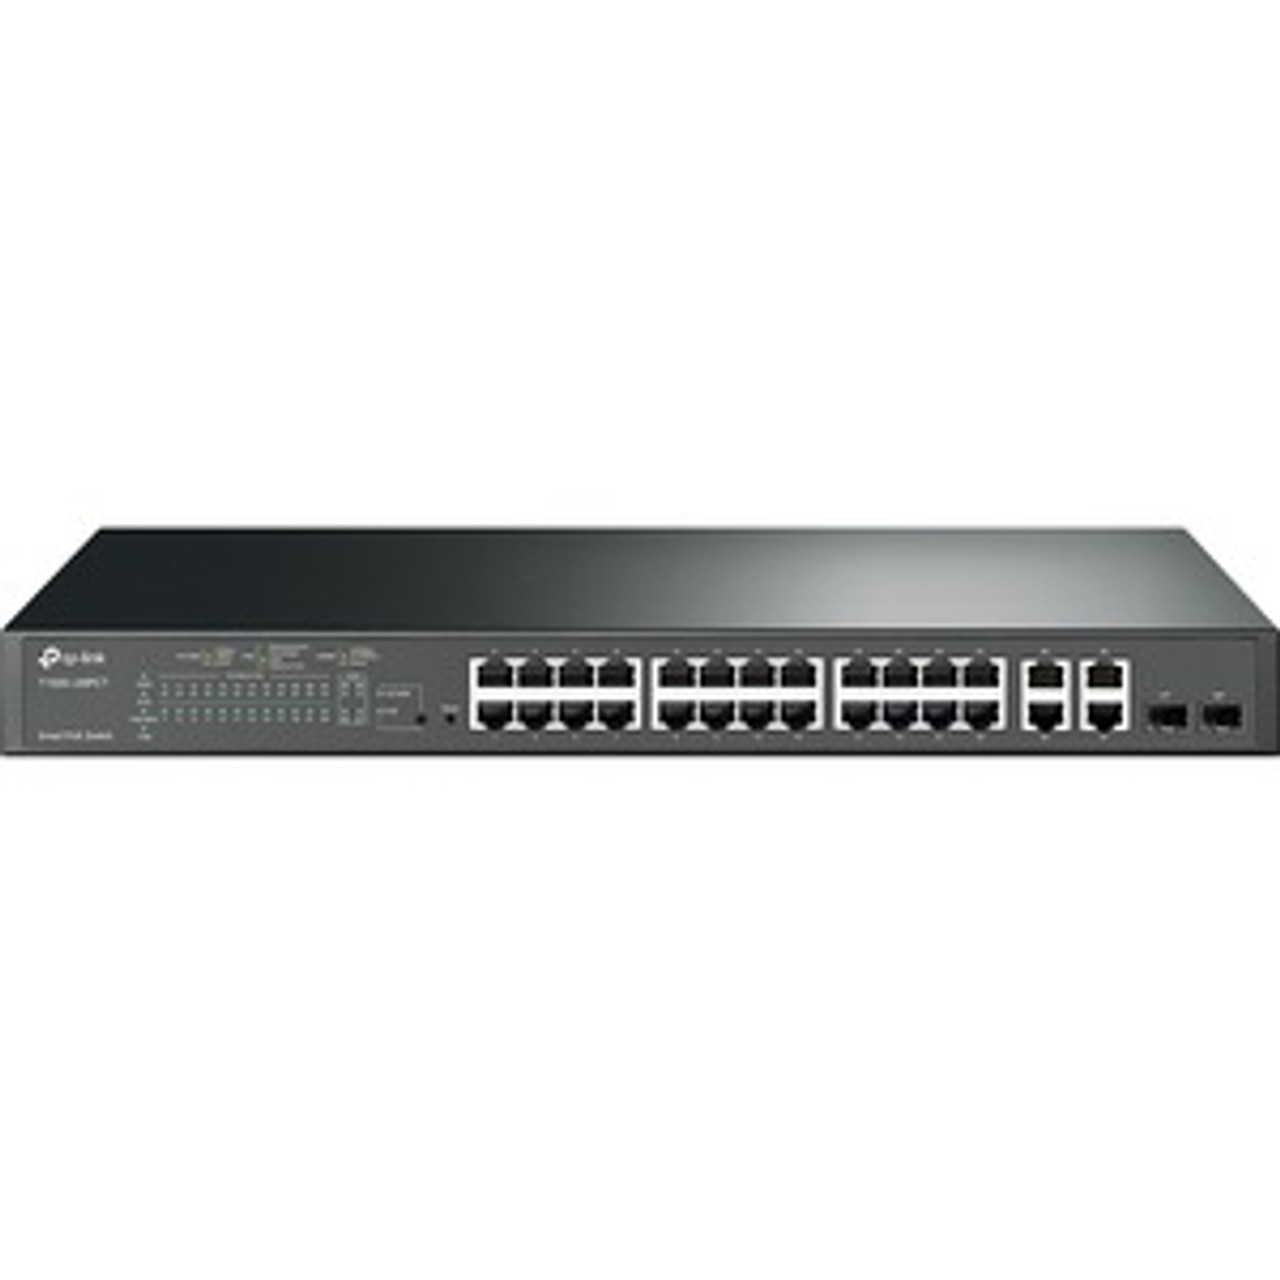 TL-SL2428P TP-Link 24-Port 10/100Mbps + 4-Port Gigabit Smart PoE+ Switch - 24 Ports - Manageable - 2 Layer Supported - 2 SFP Slots - 229.73 W Power Consumption